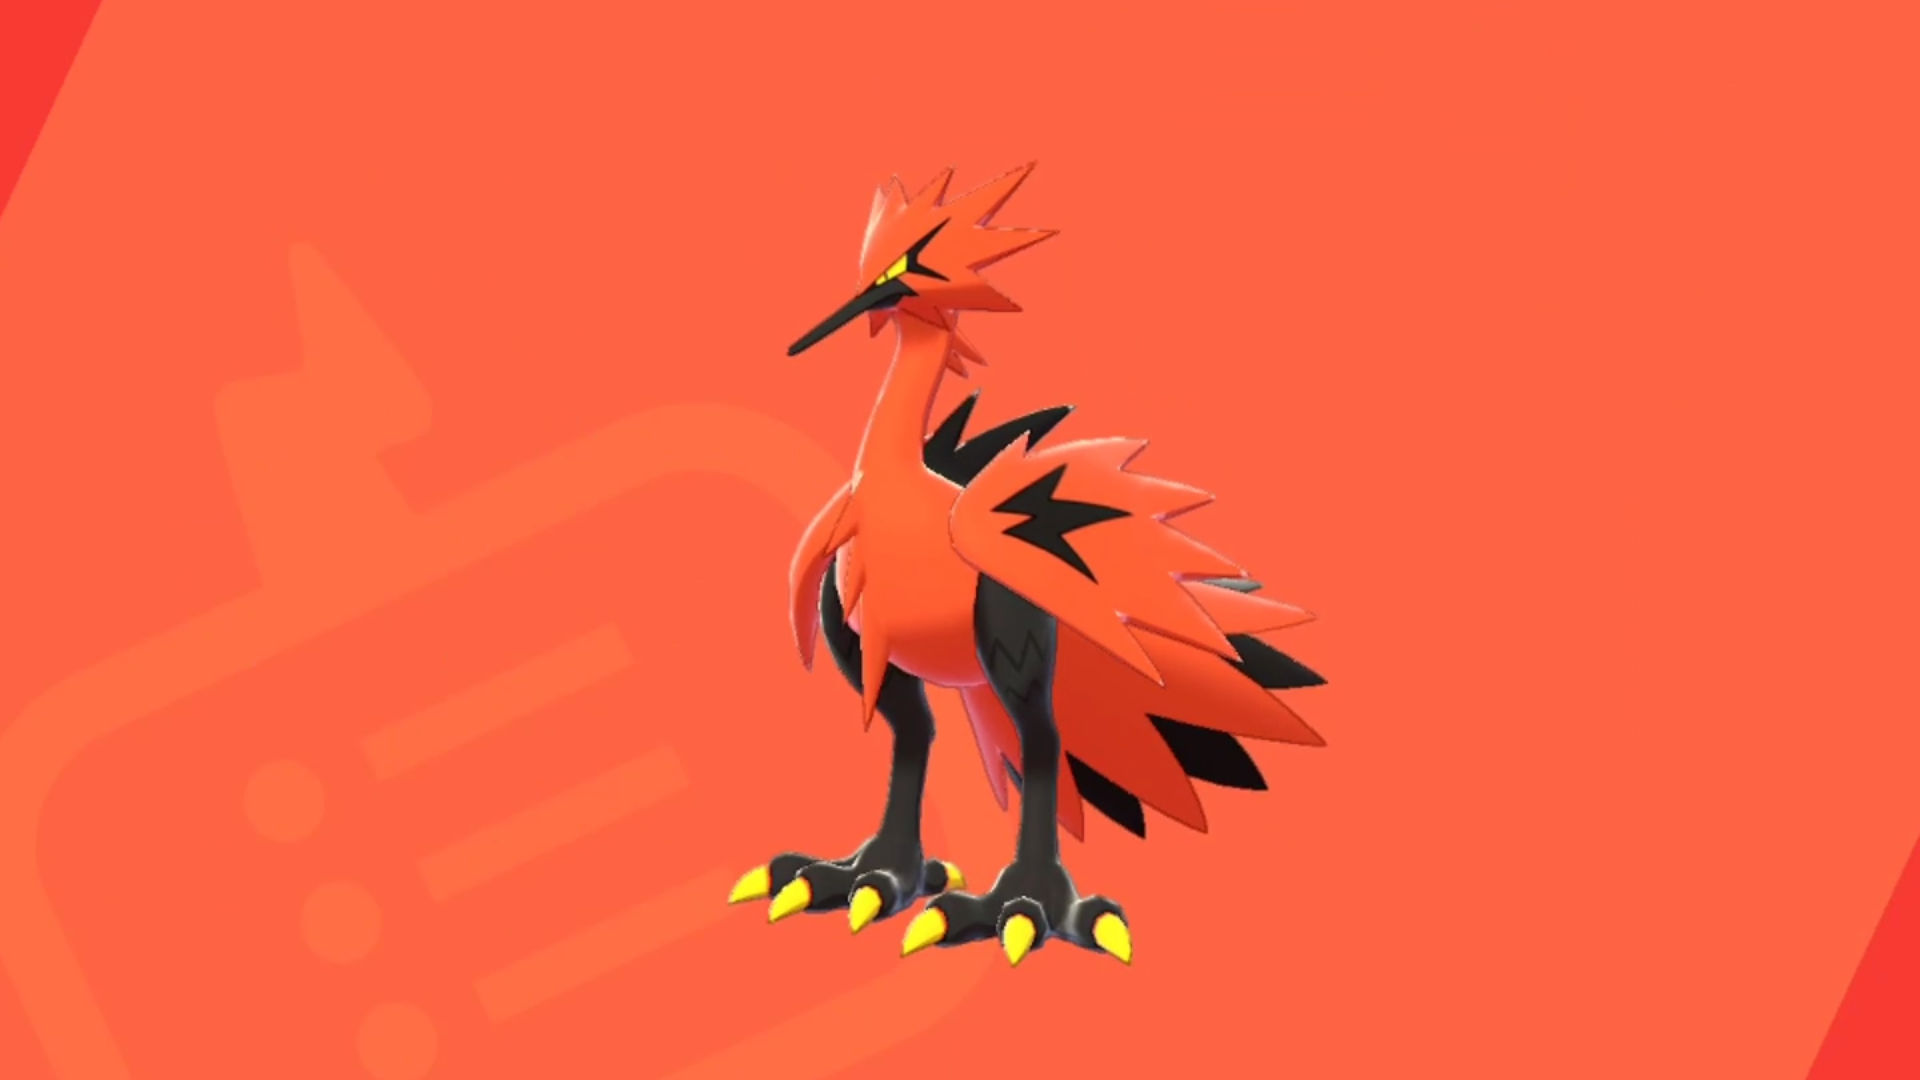 Smogon University - Galarian Zapdos, Fighting/Flying-type with the